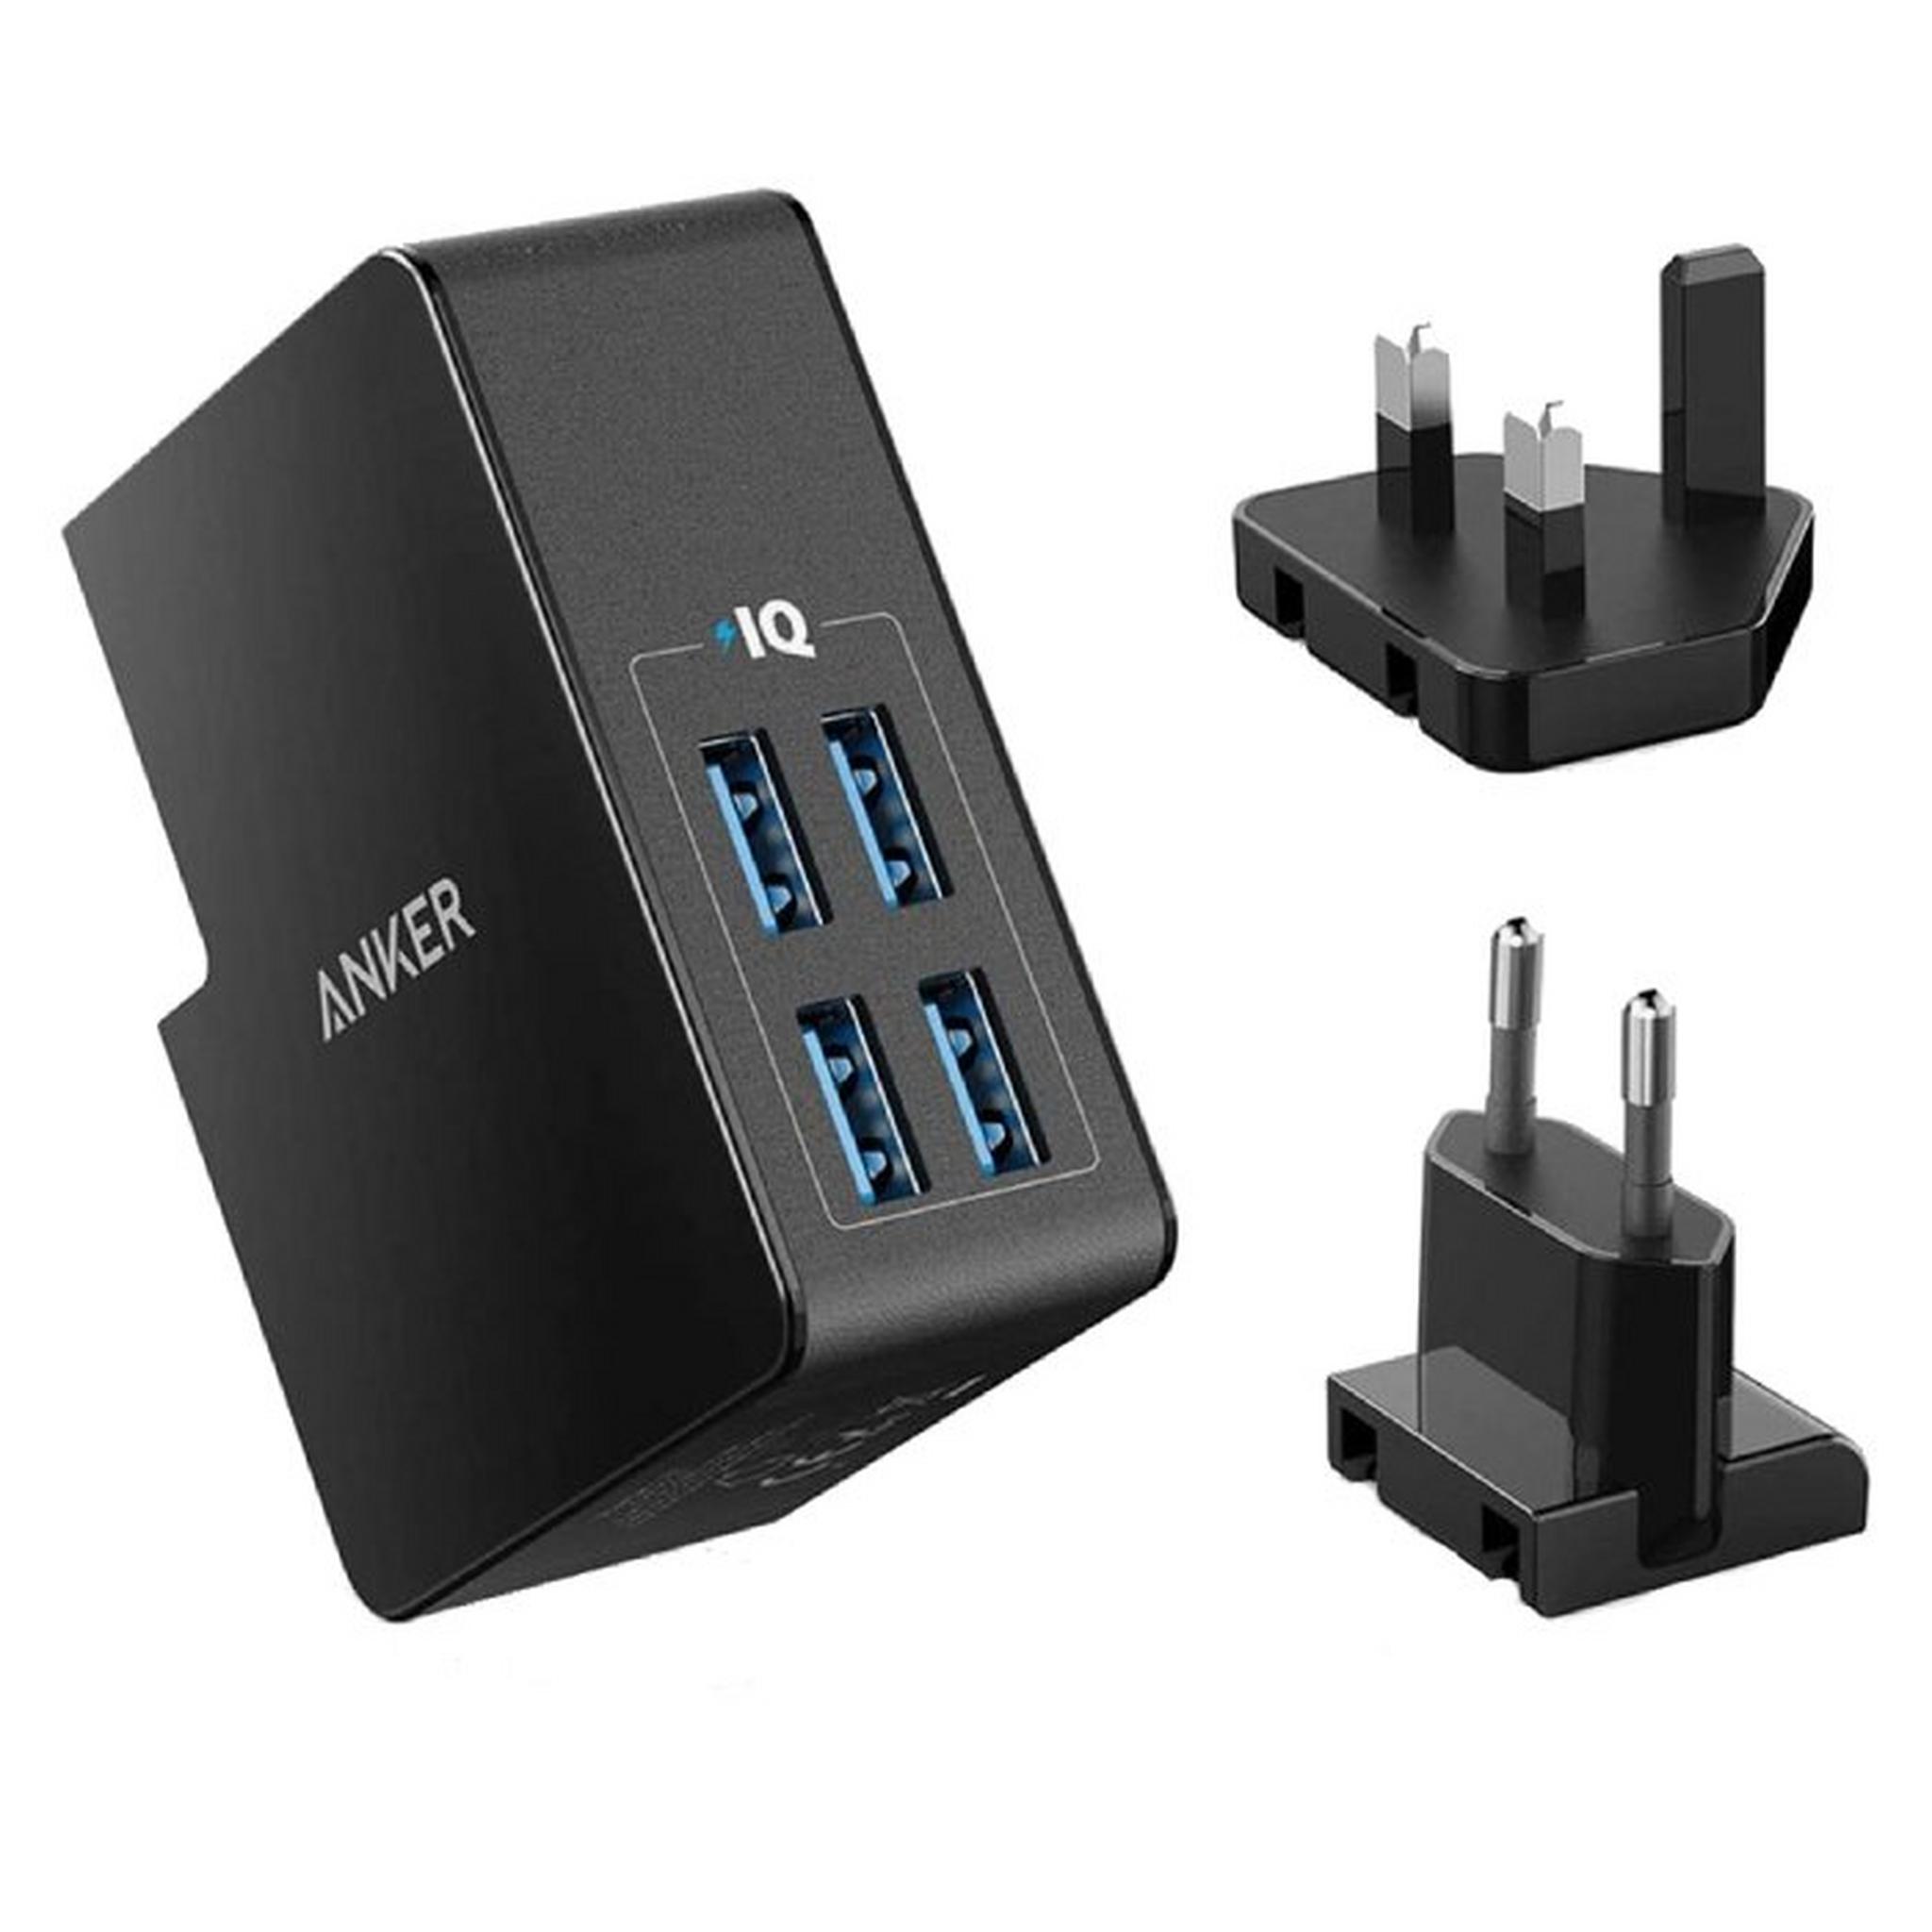 Anker PowerPort 4 Lite Wall charger (A2042L11) - Black